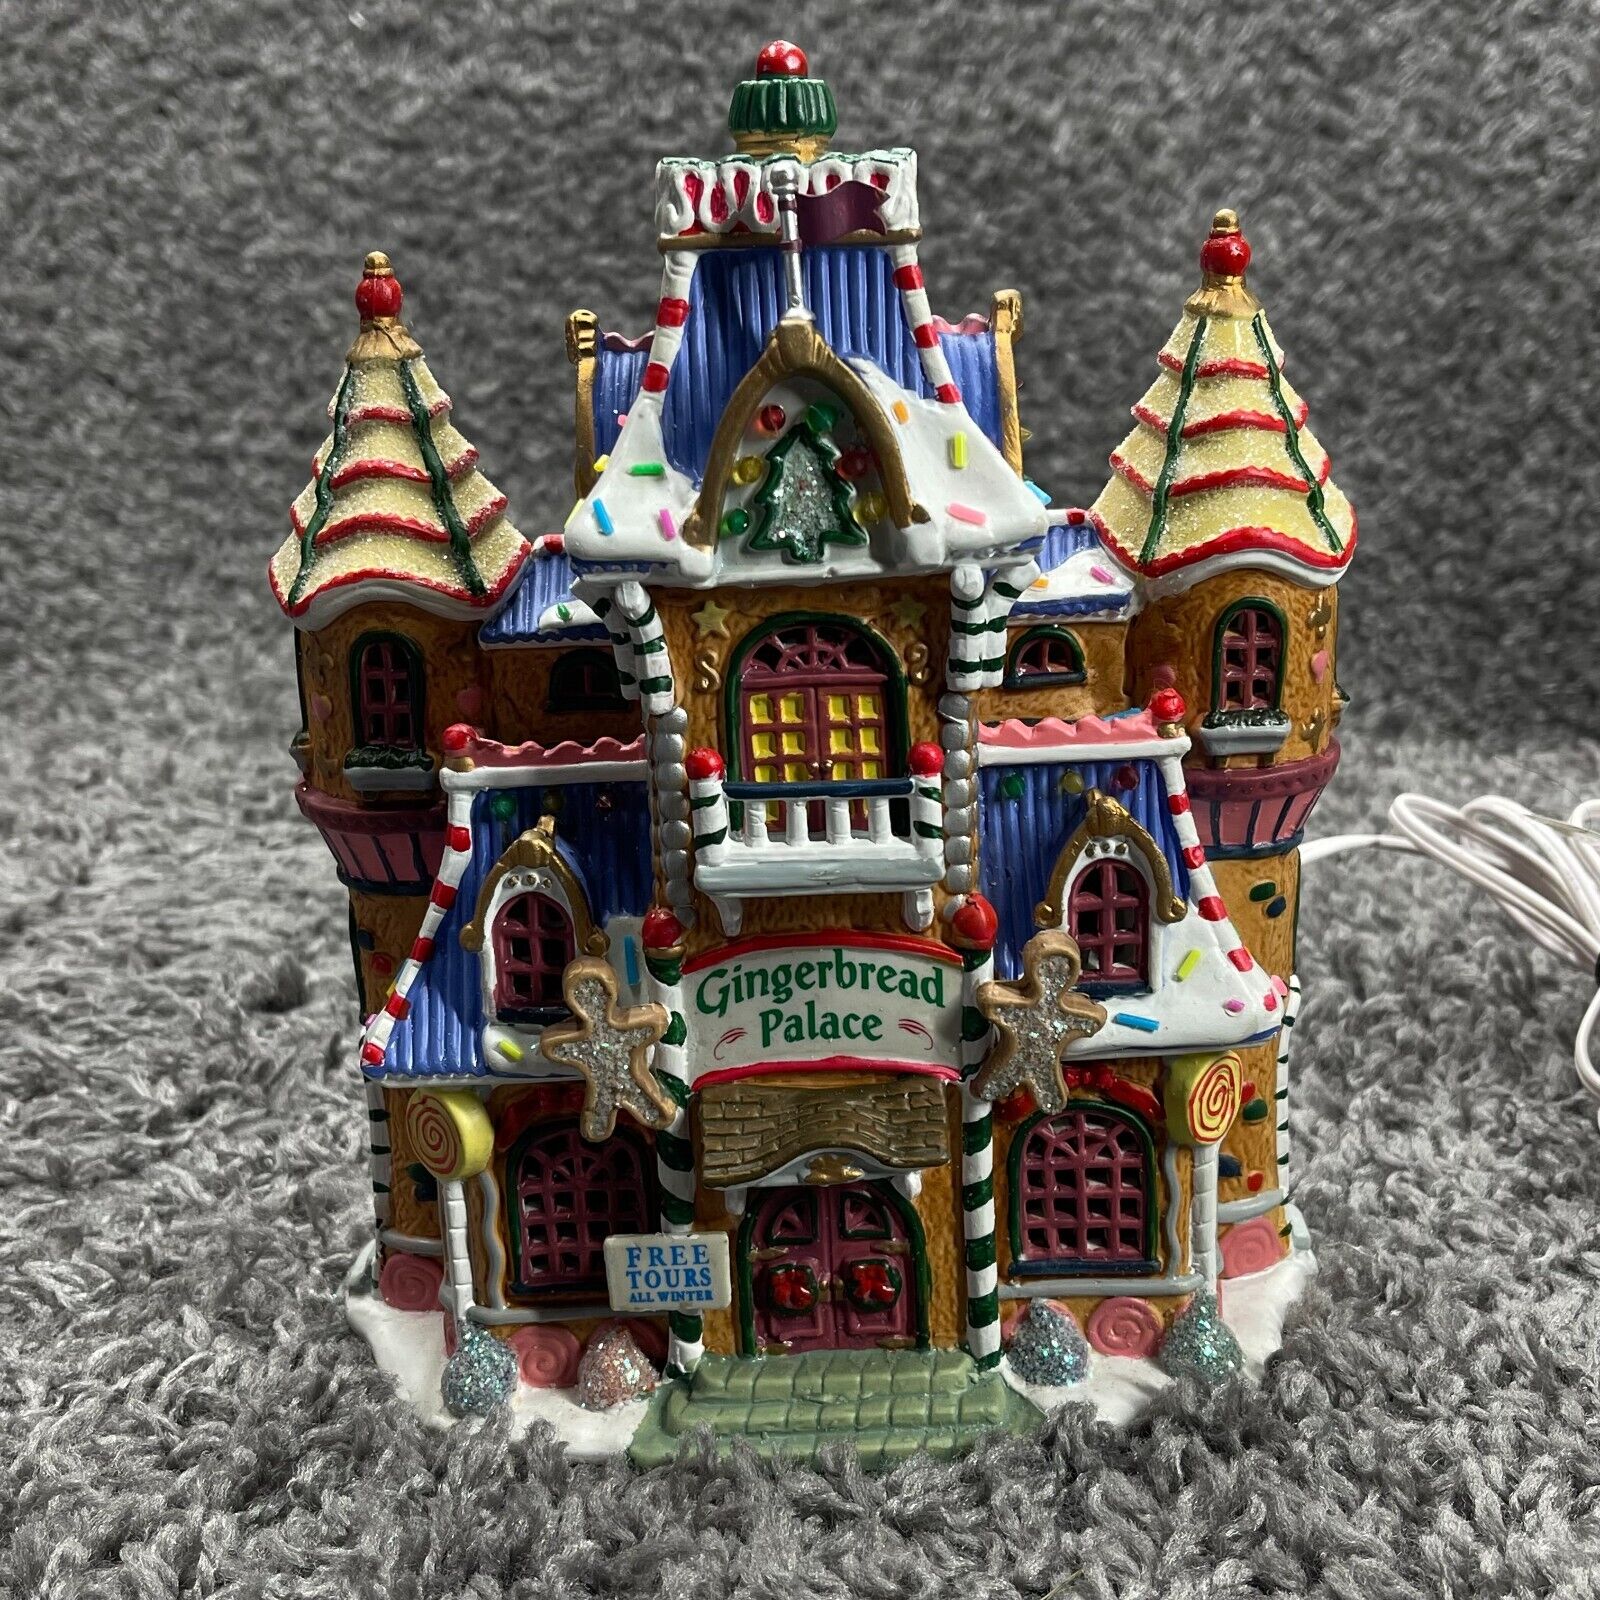 Lemax Sugar N Spice Christmas Porcelain Gingerbread Palace - New in Box